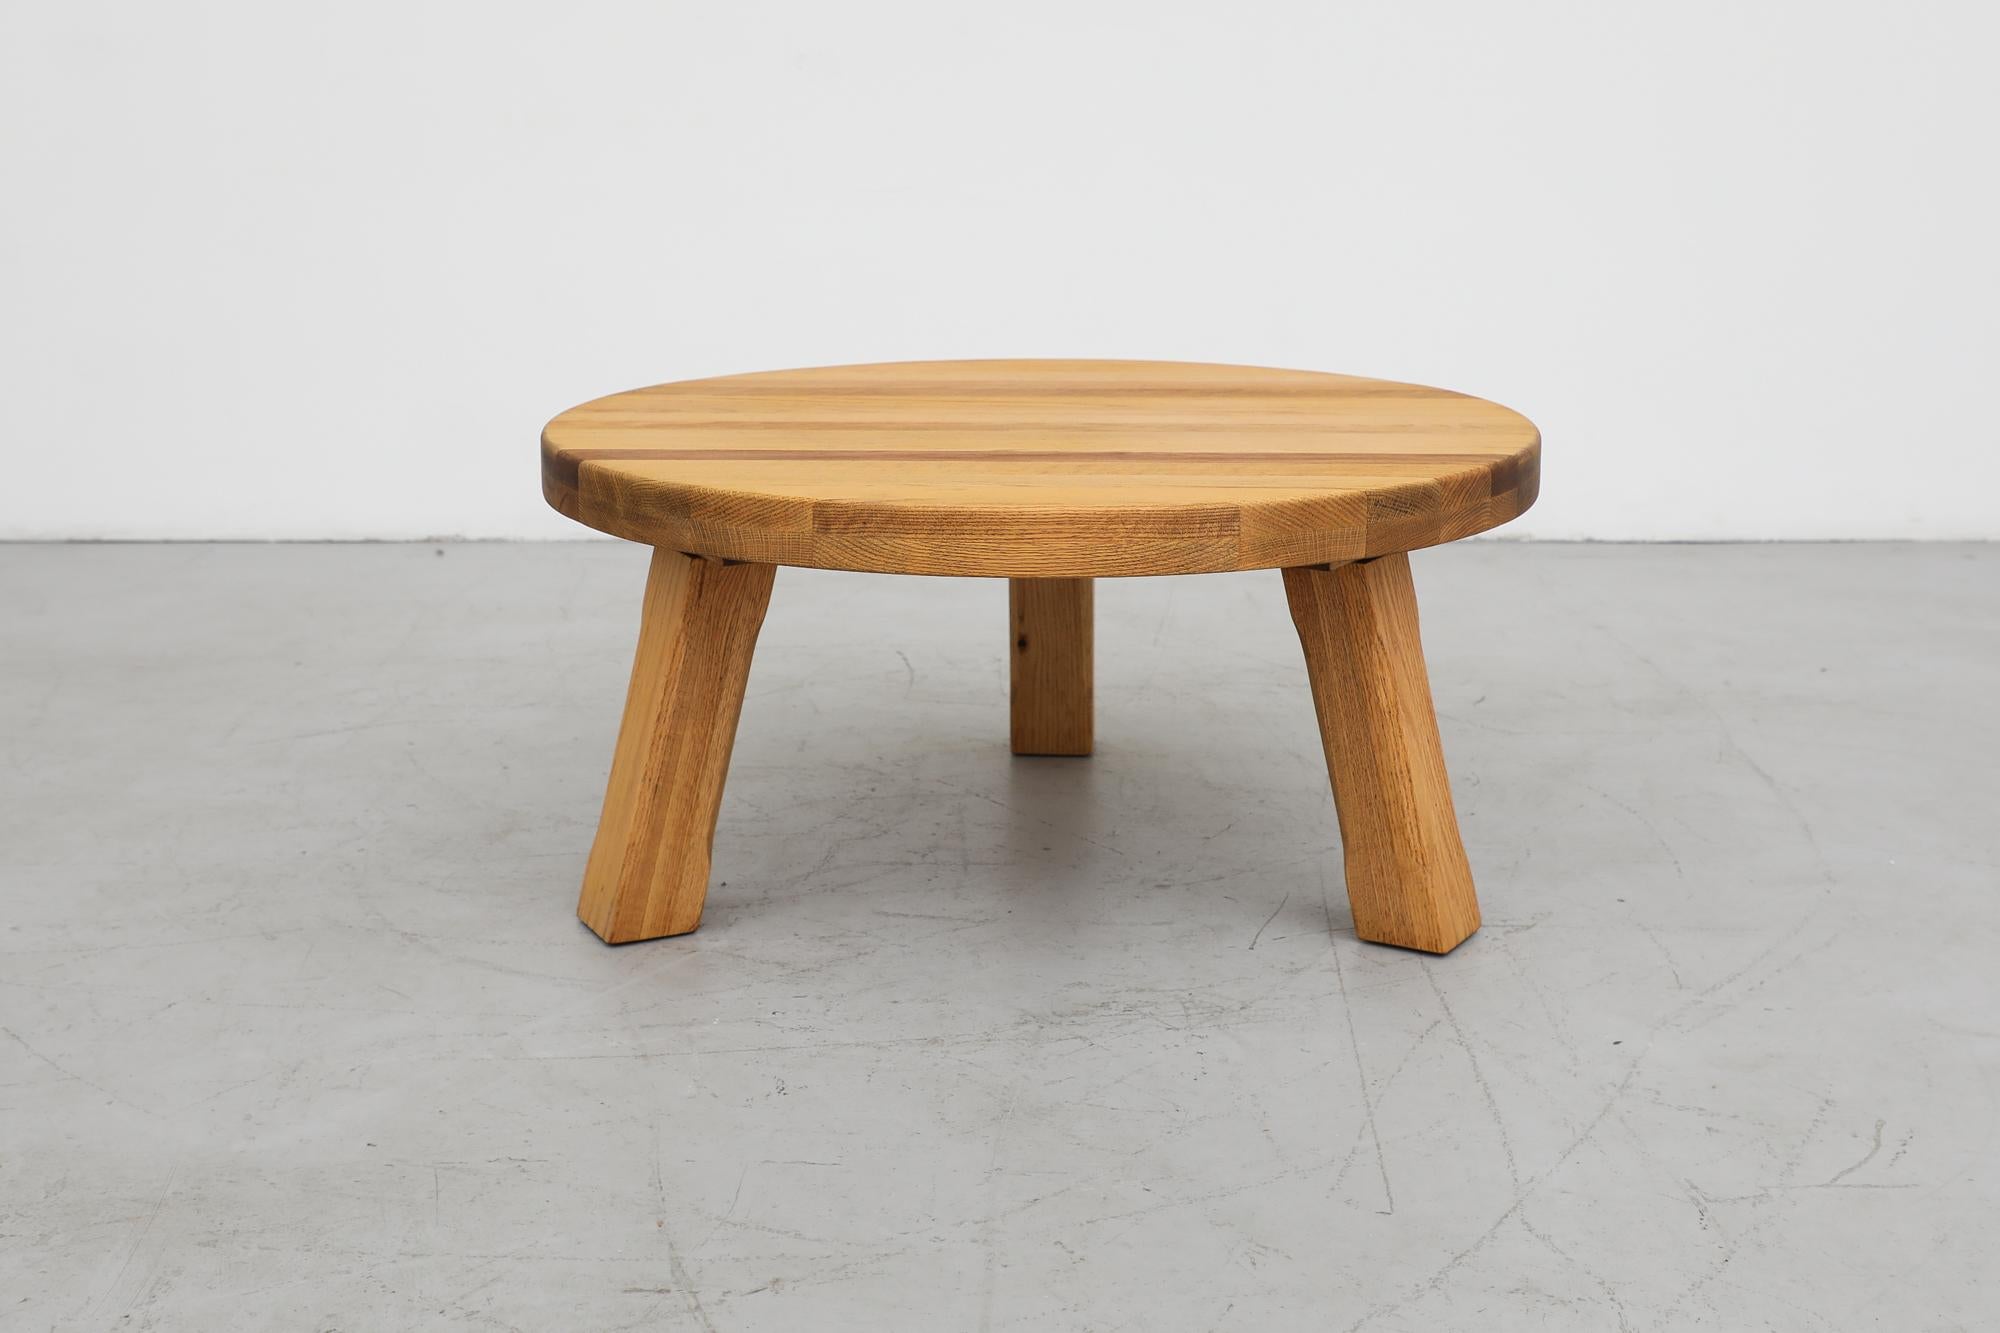 This heavy round Brutalist coffee table is made from solid oak with a waxed finish. The table has three sturdy square tripod legs with carved detail down the sides. Sanded, refinished and hand waxed, in otherwise original condition with visible wear